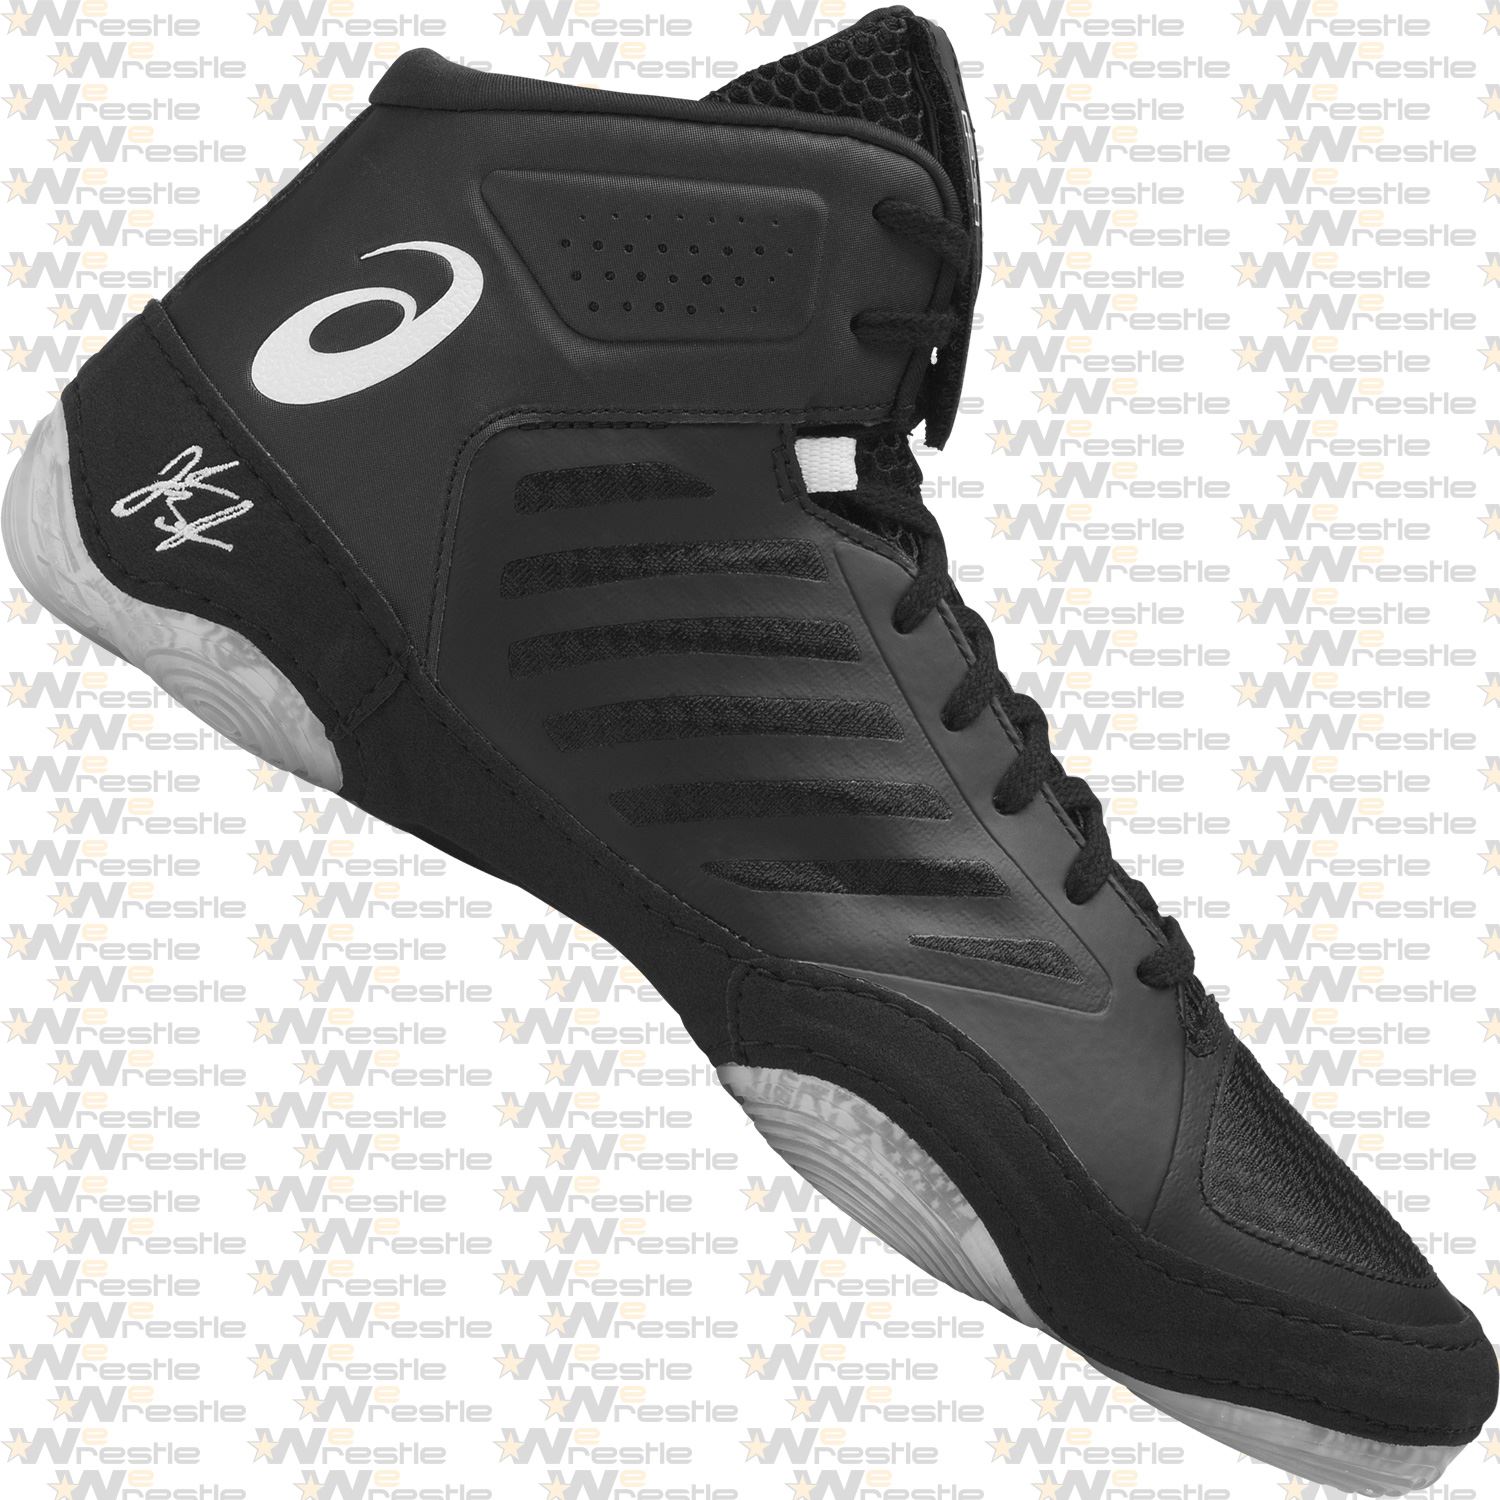 jb youth wrestling shoes